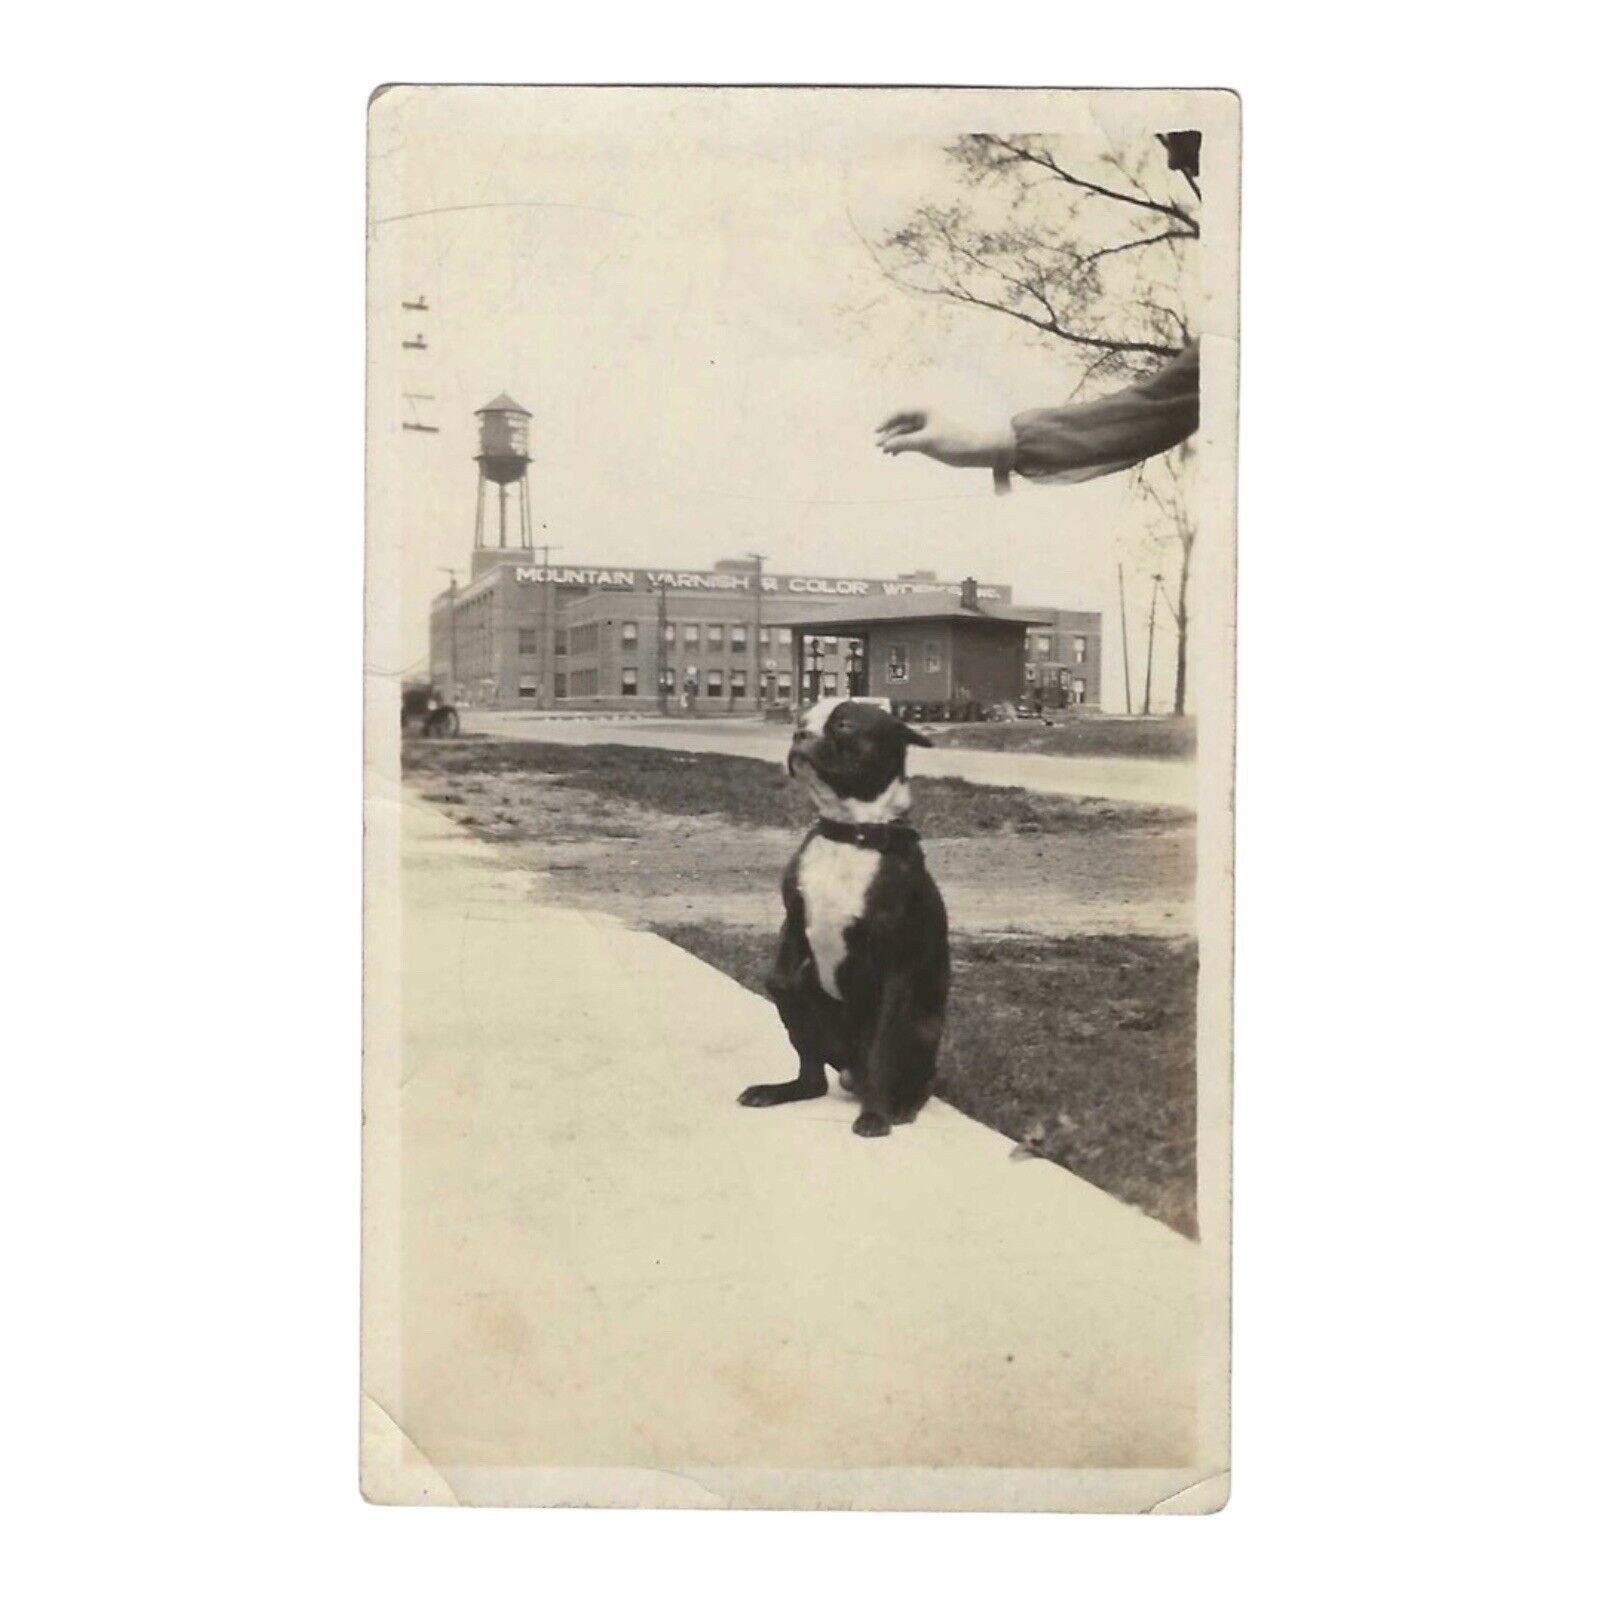 Vintage Snapshot Photo 1920s Boston Terrier Dog Womens Arm From Out Of Frame